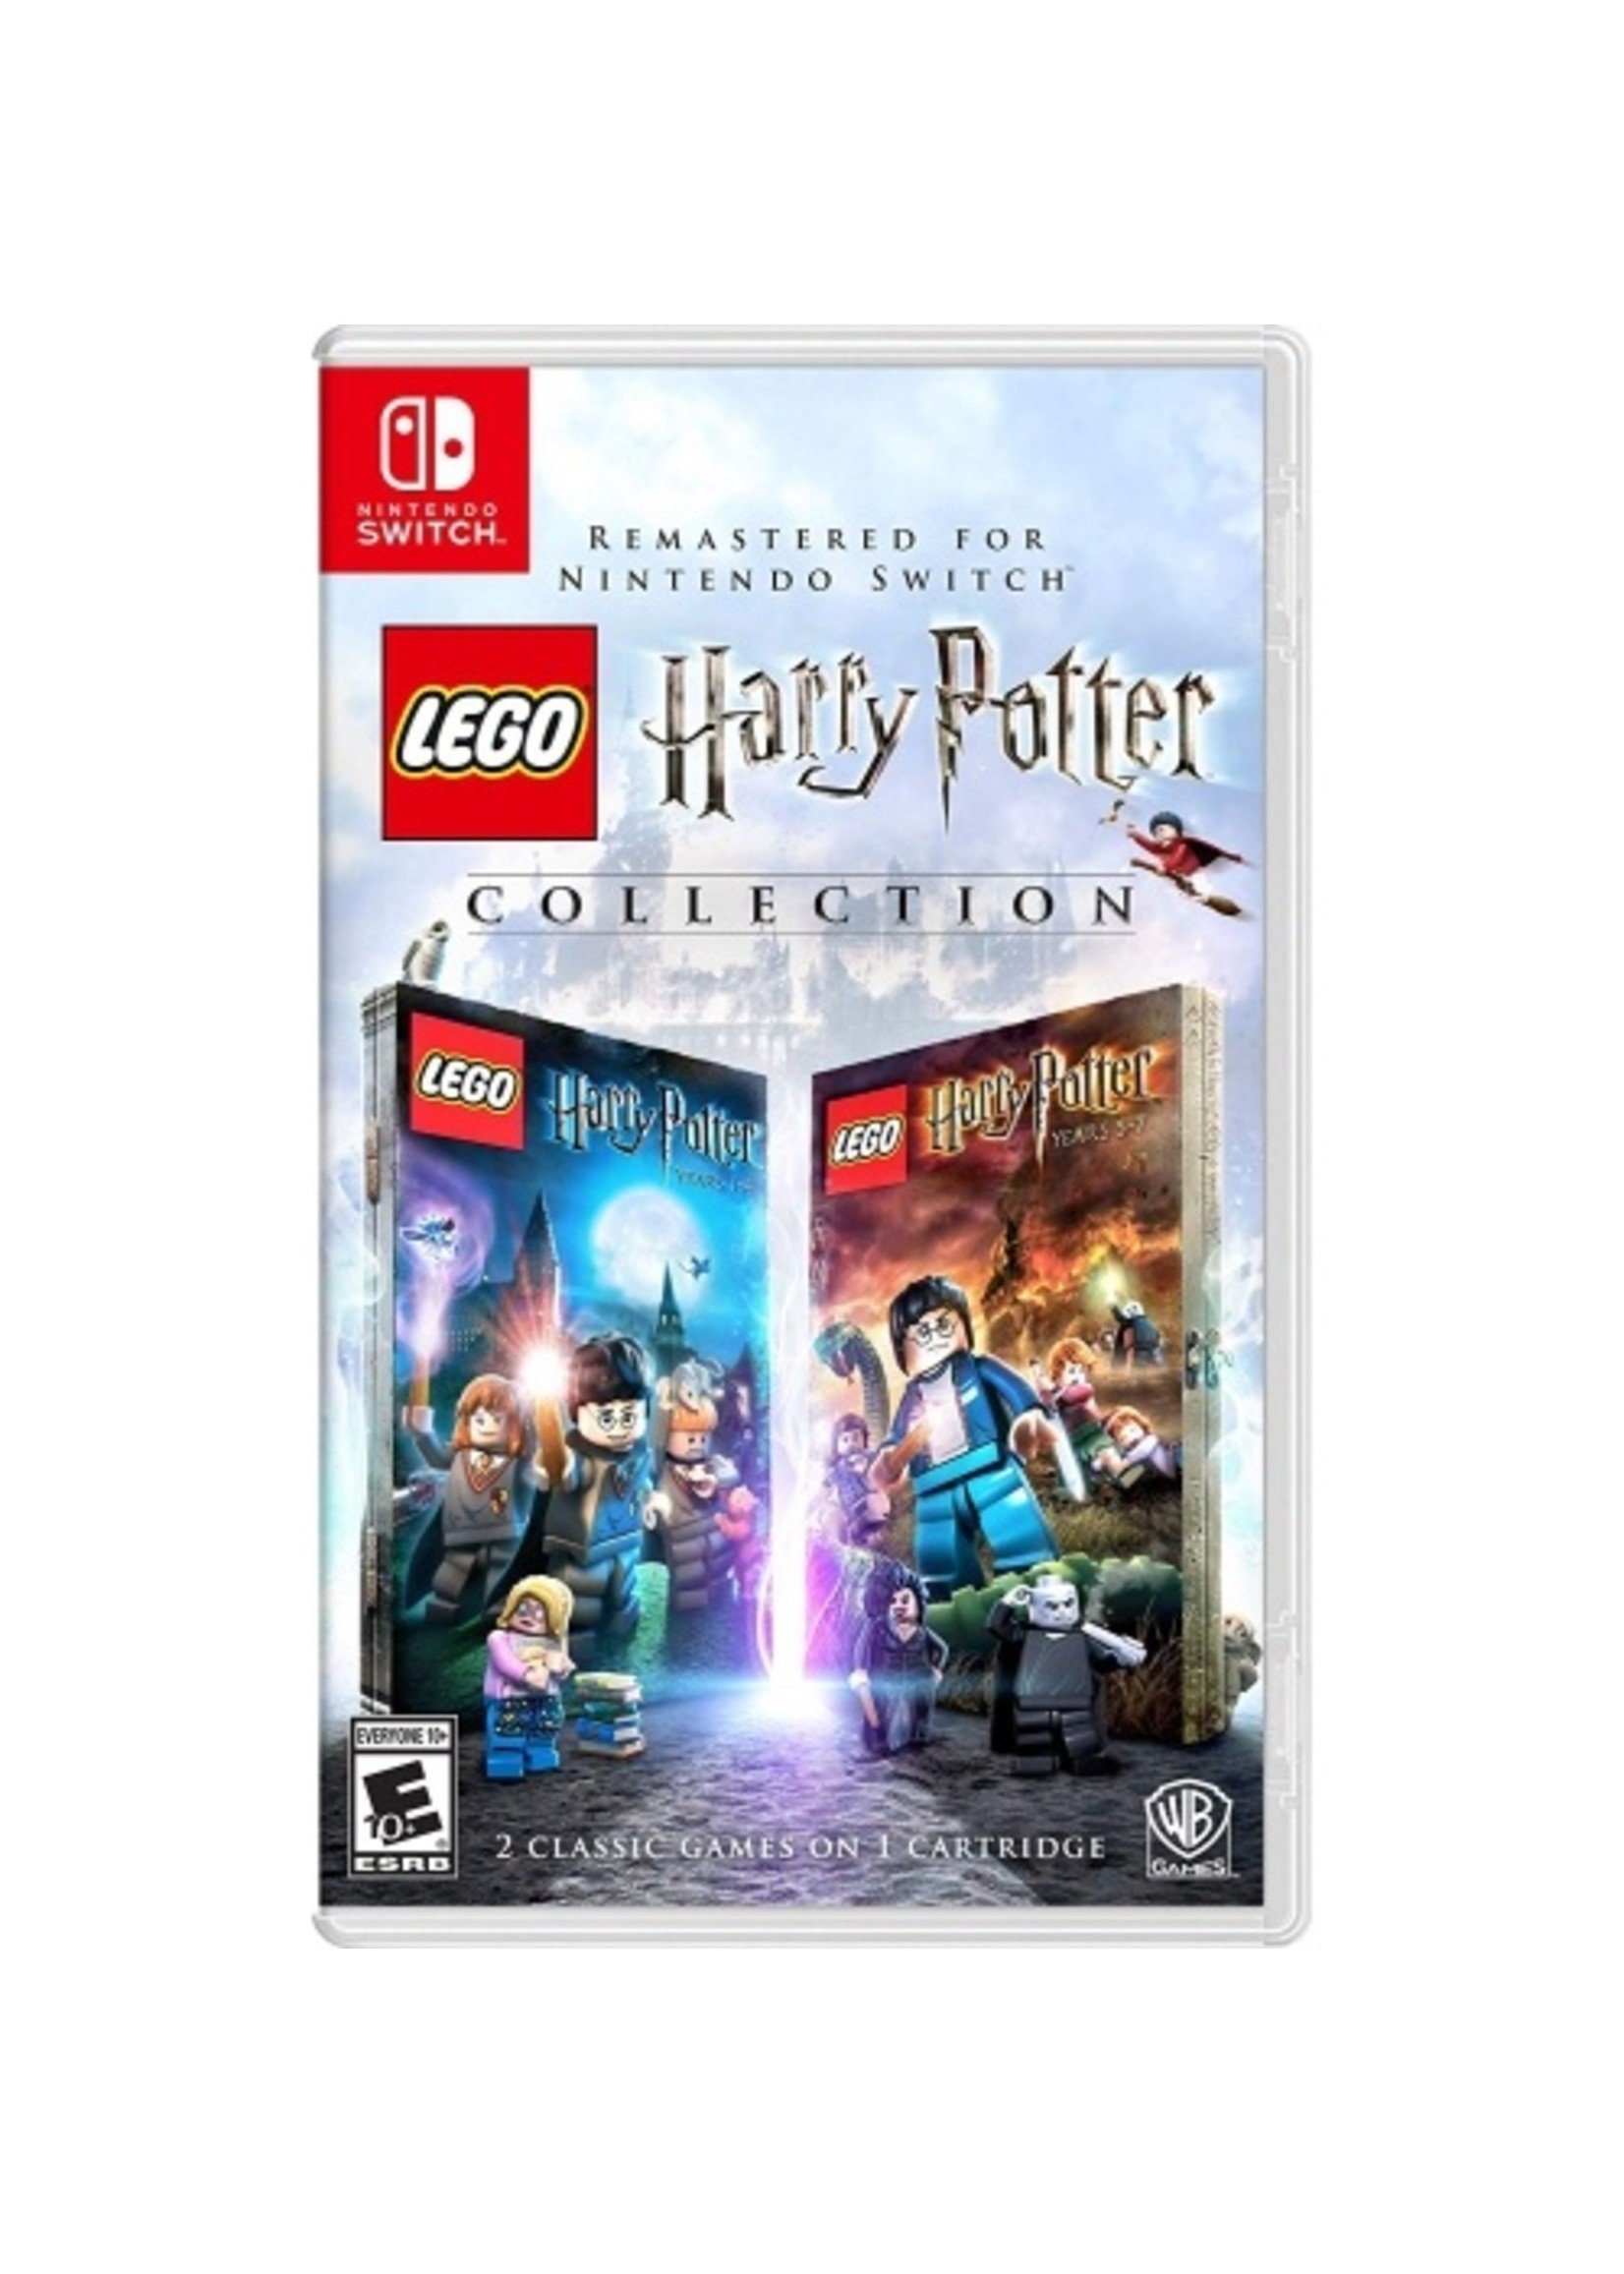 LEGO Harry Potter Collection - SWITCH PrePlayed